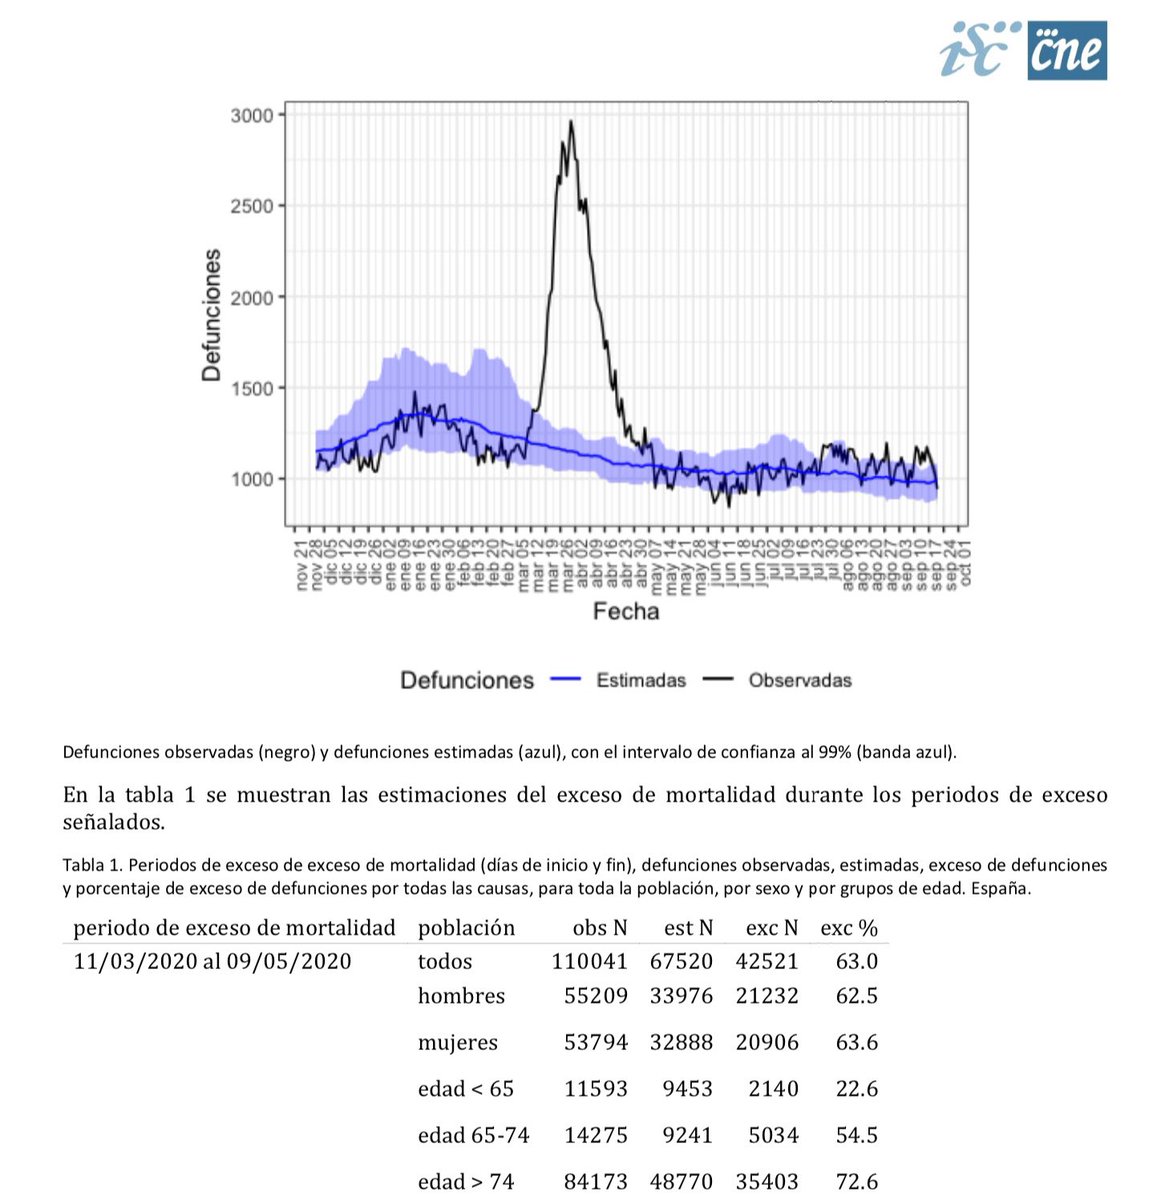 Why Spain? 1. there was a huge excess mortality in Spain2. Spain had the strictest lockdown in EuropeThe points 1. and 2. seem to confirm the collateral damage thesis. /463% excess mortality in Spain between 11 March and 9 May 2020: